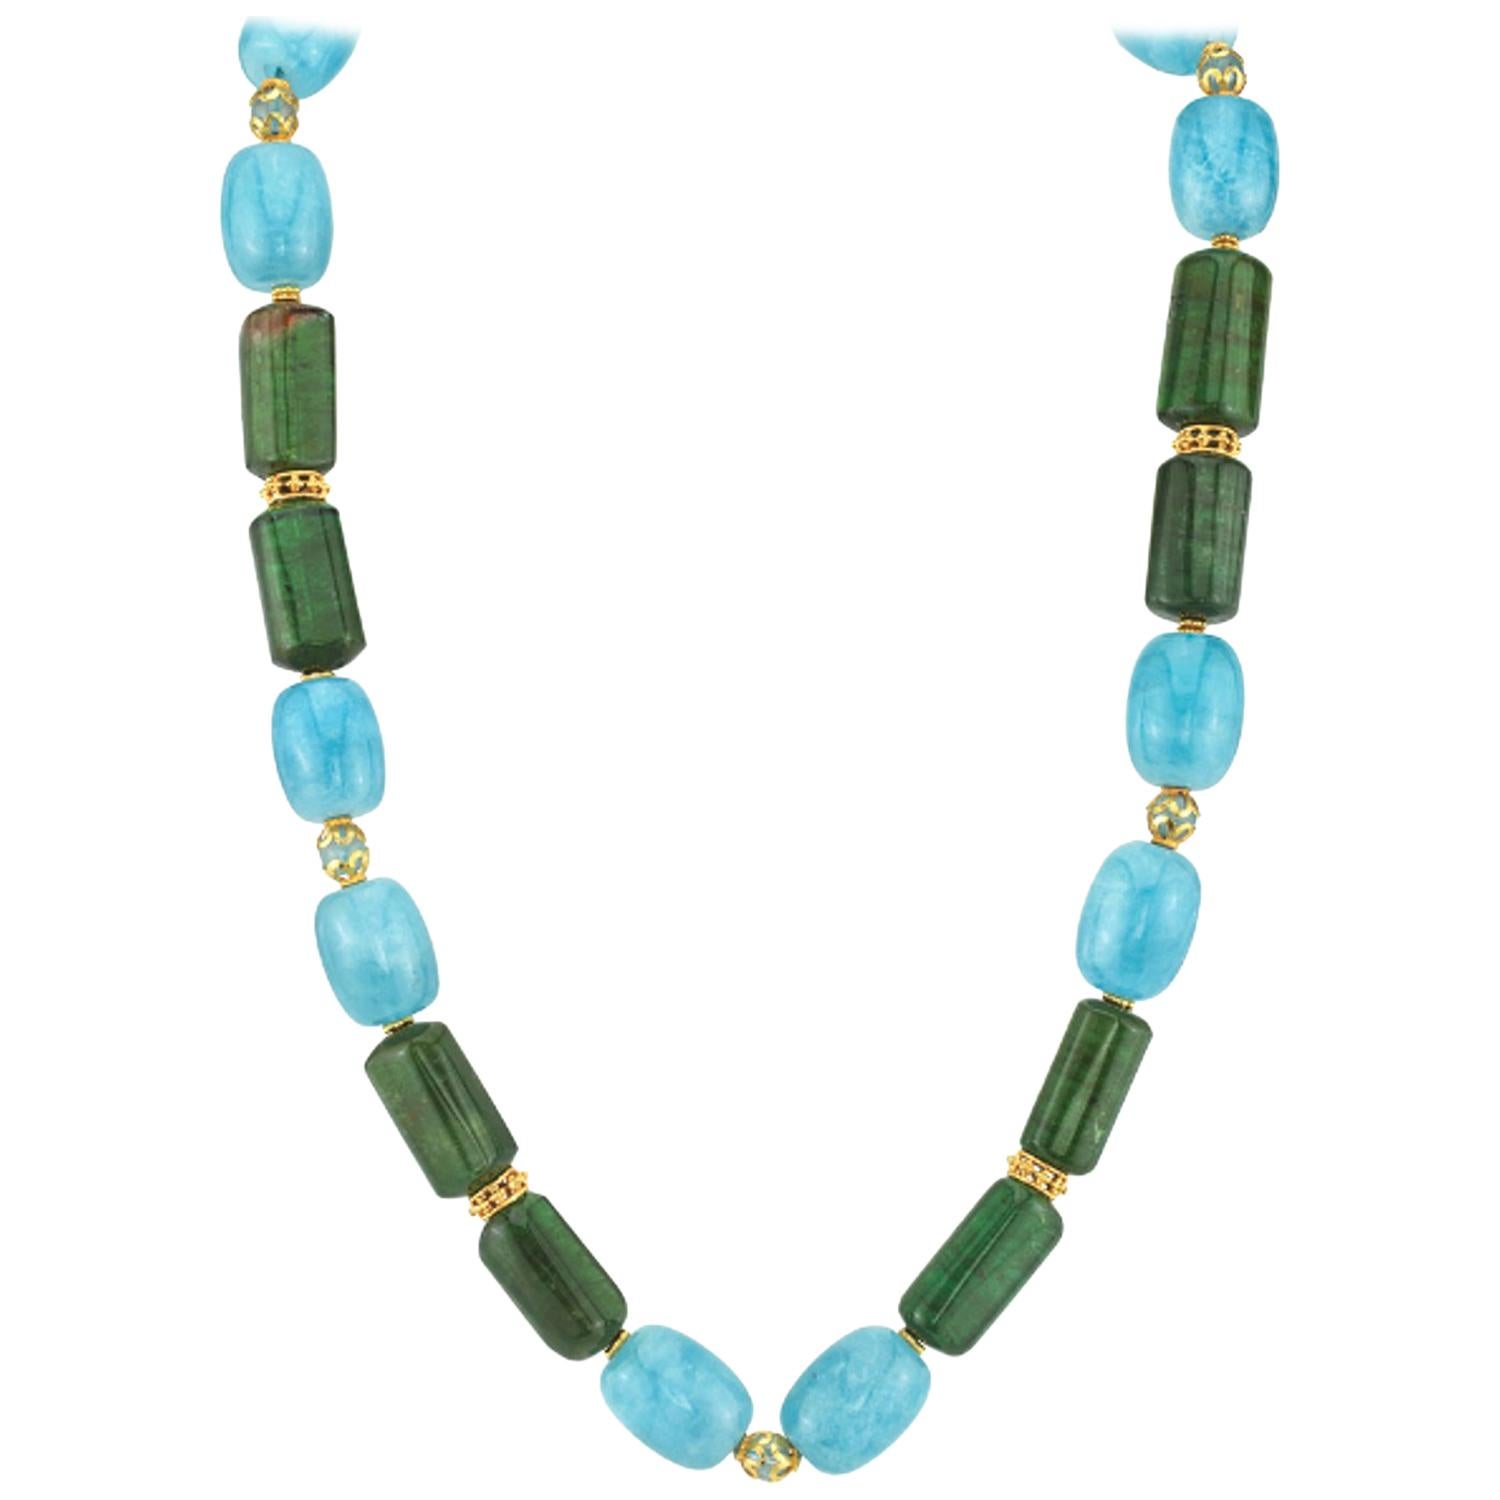 Aquamarine and Tourmaline Barrel Shaped Bead Necklace with Yellow Gold Accents